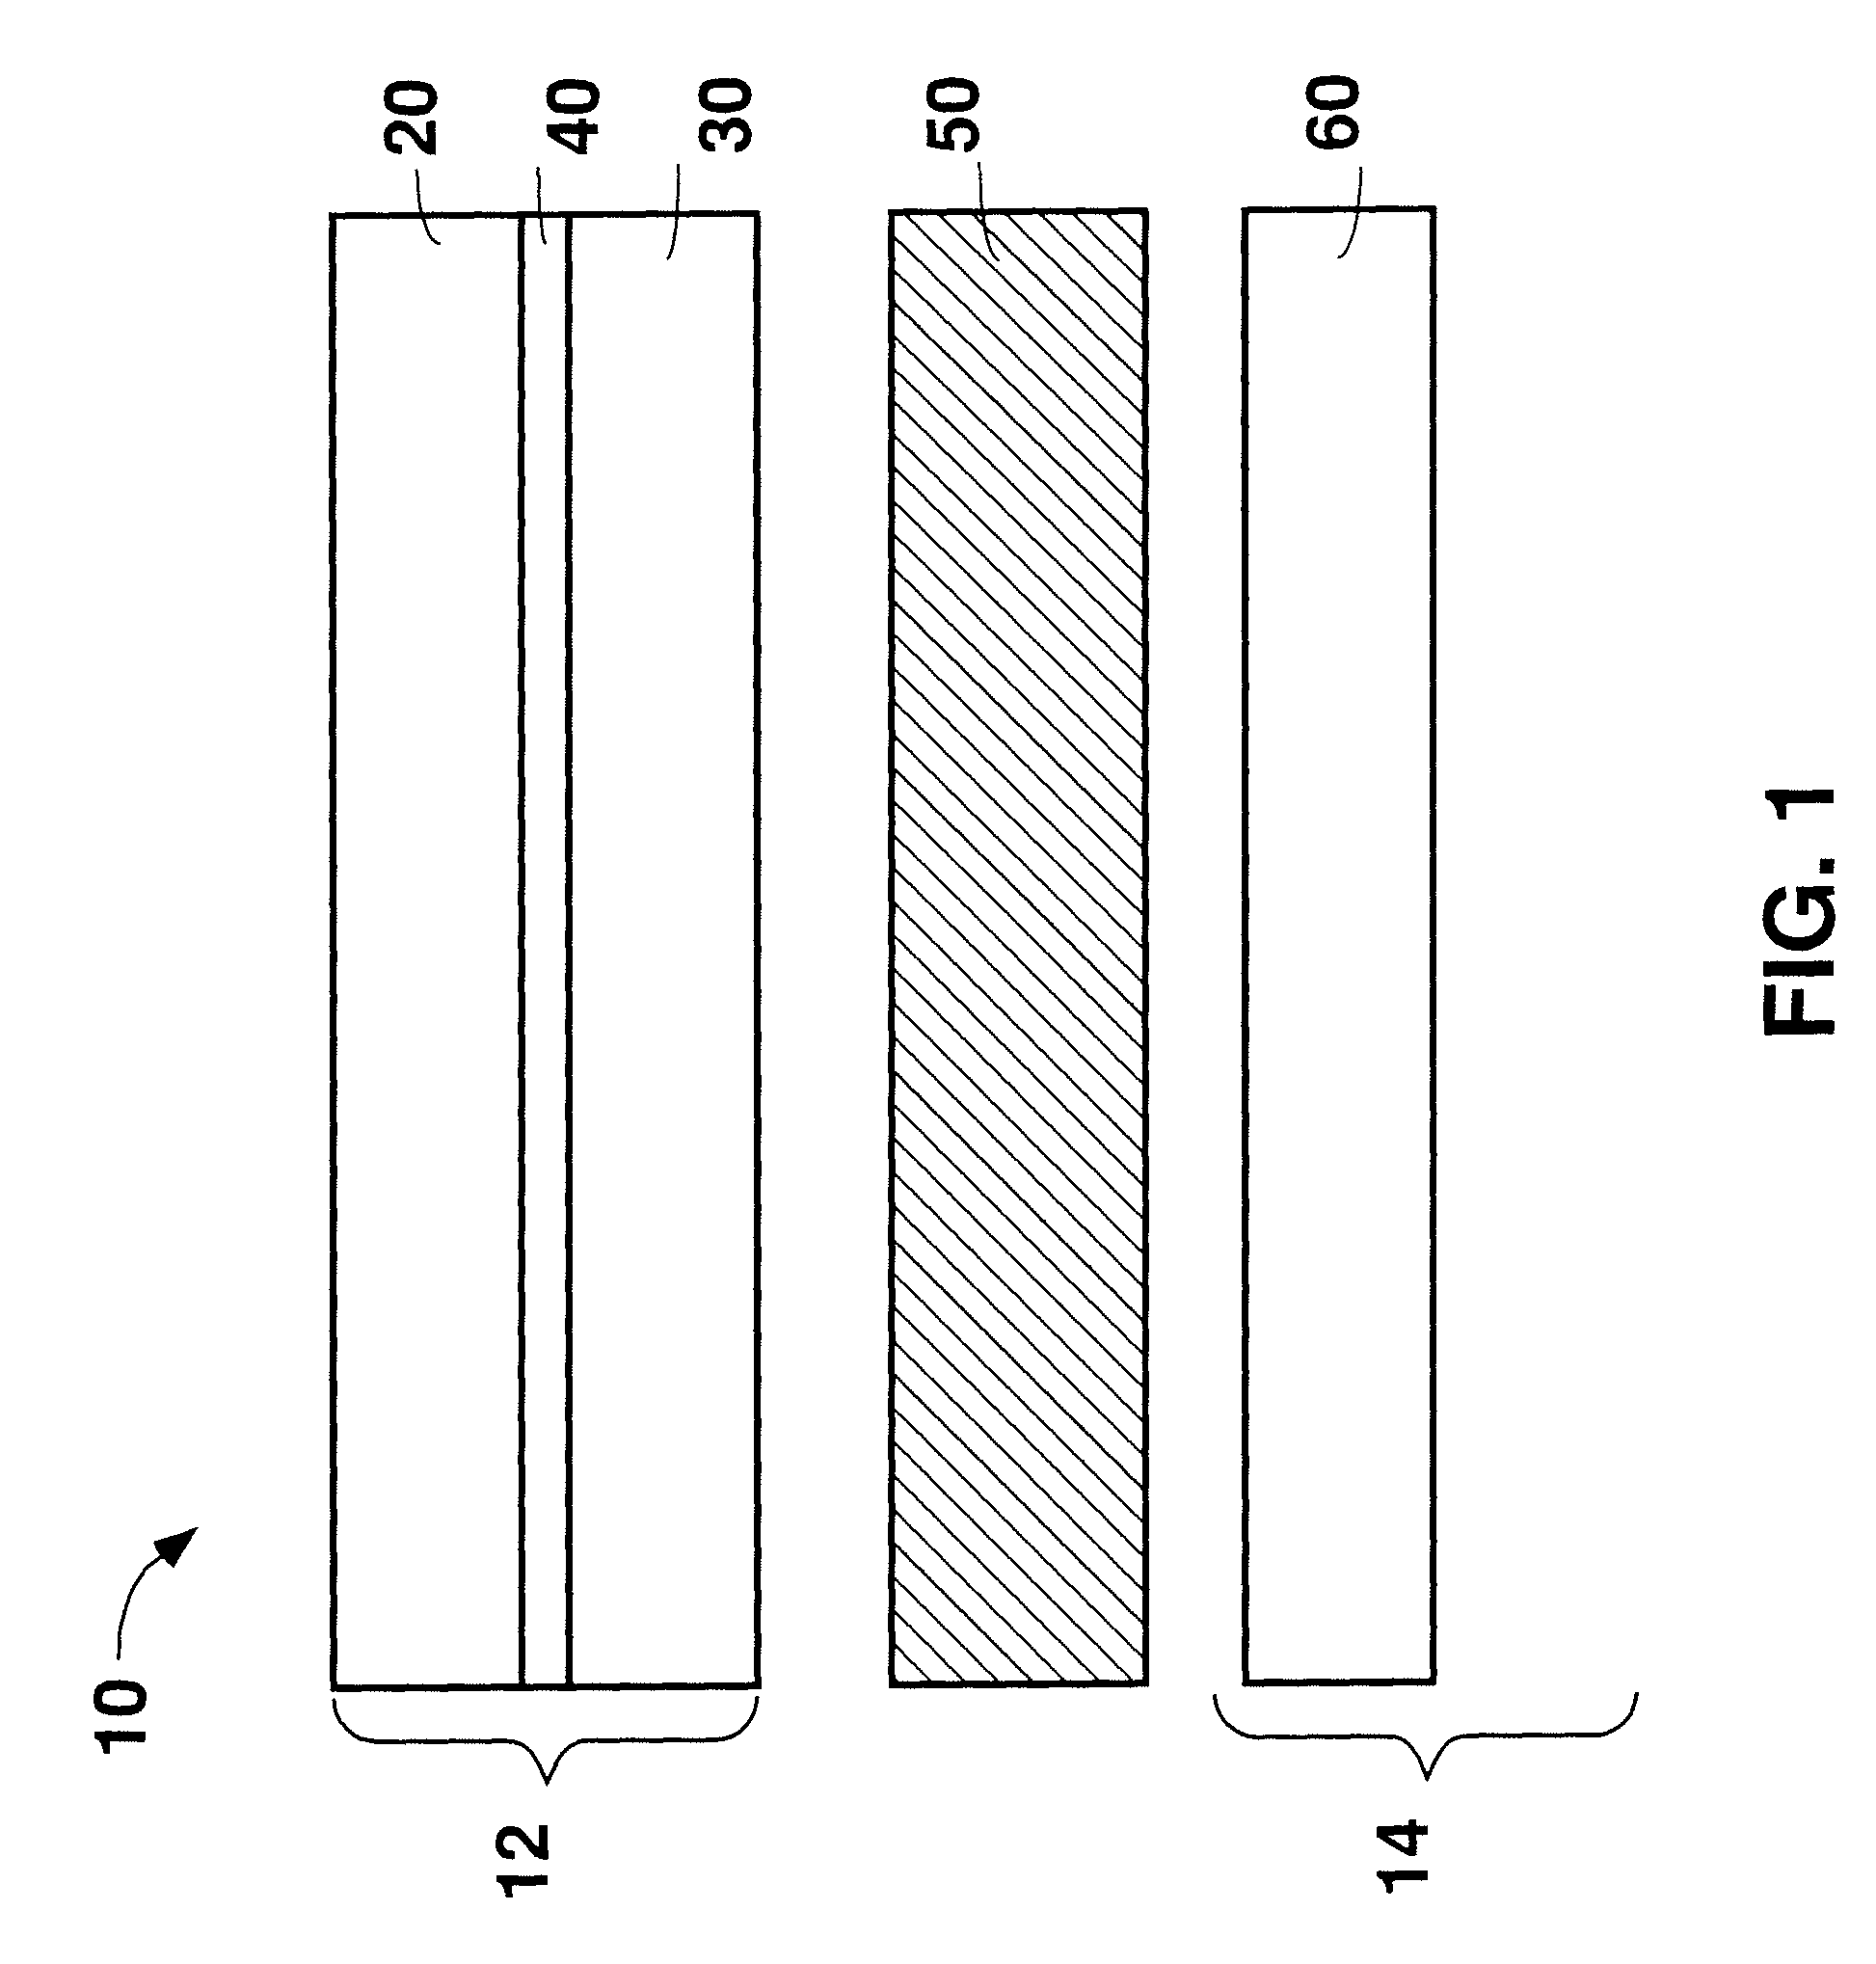 Method for reducing formation of electrically resistive layer on ferritic stainless steels